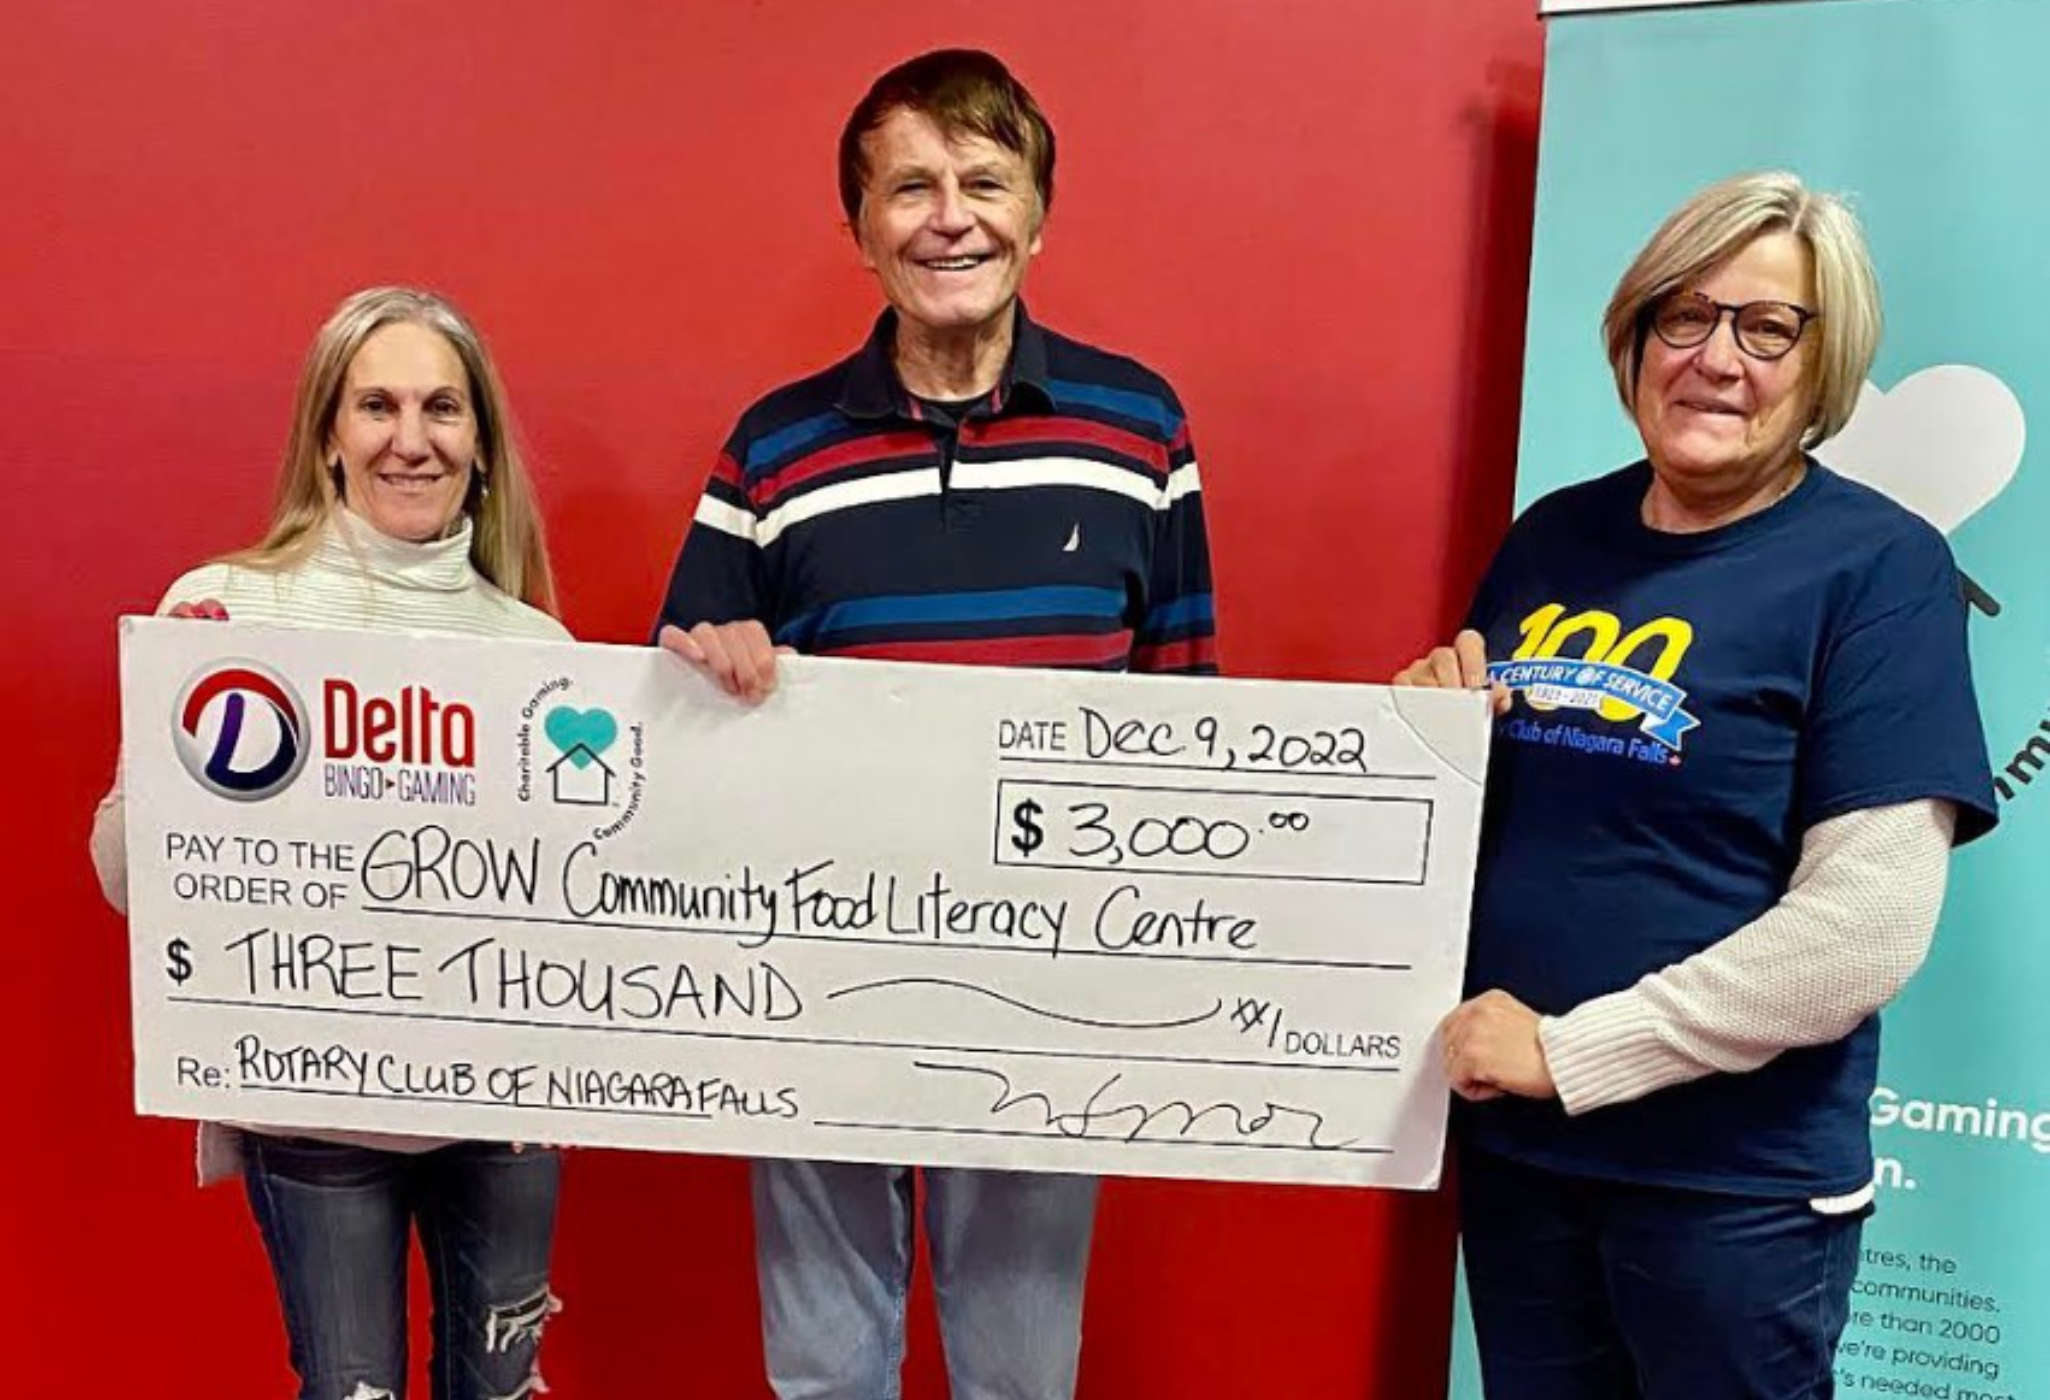 Rose with two volunteers from the Rotary Club of Niagara Falls. The three are smiling and holding a giant cheque for $3000 made out to Grow Community Food Literacy Centre